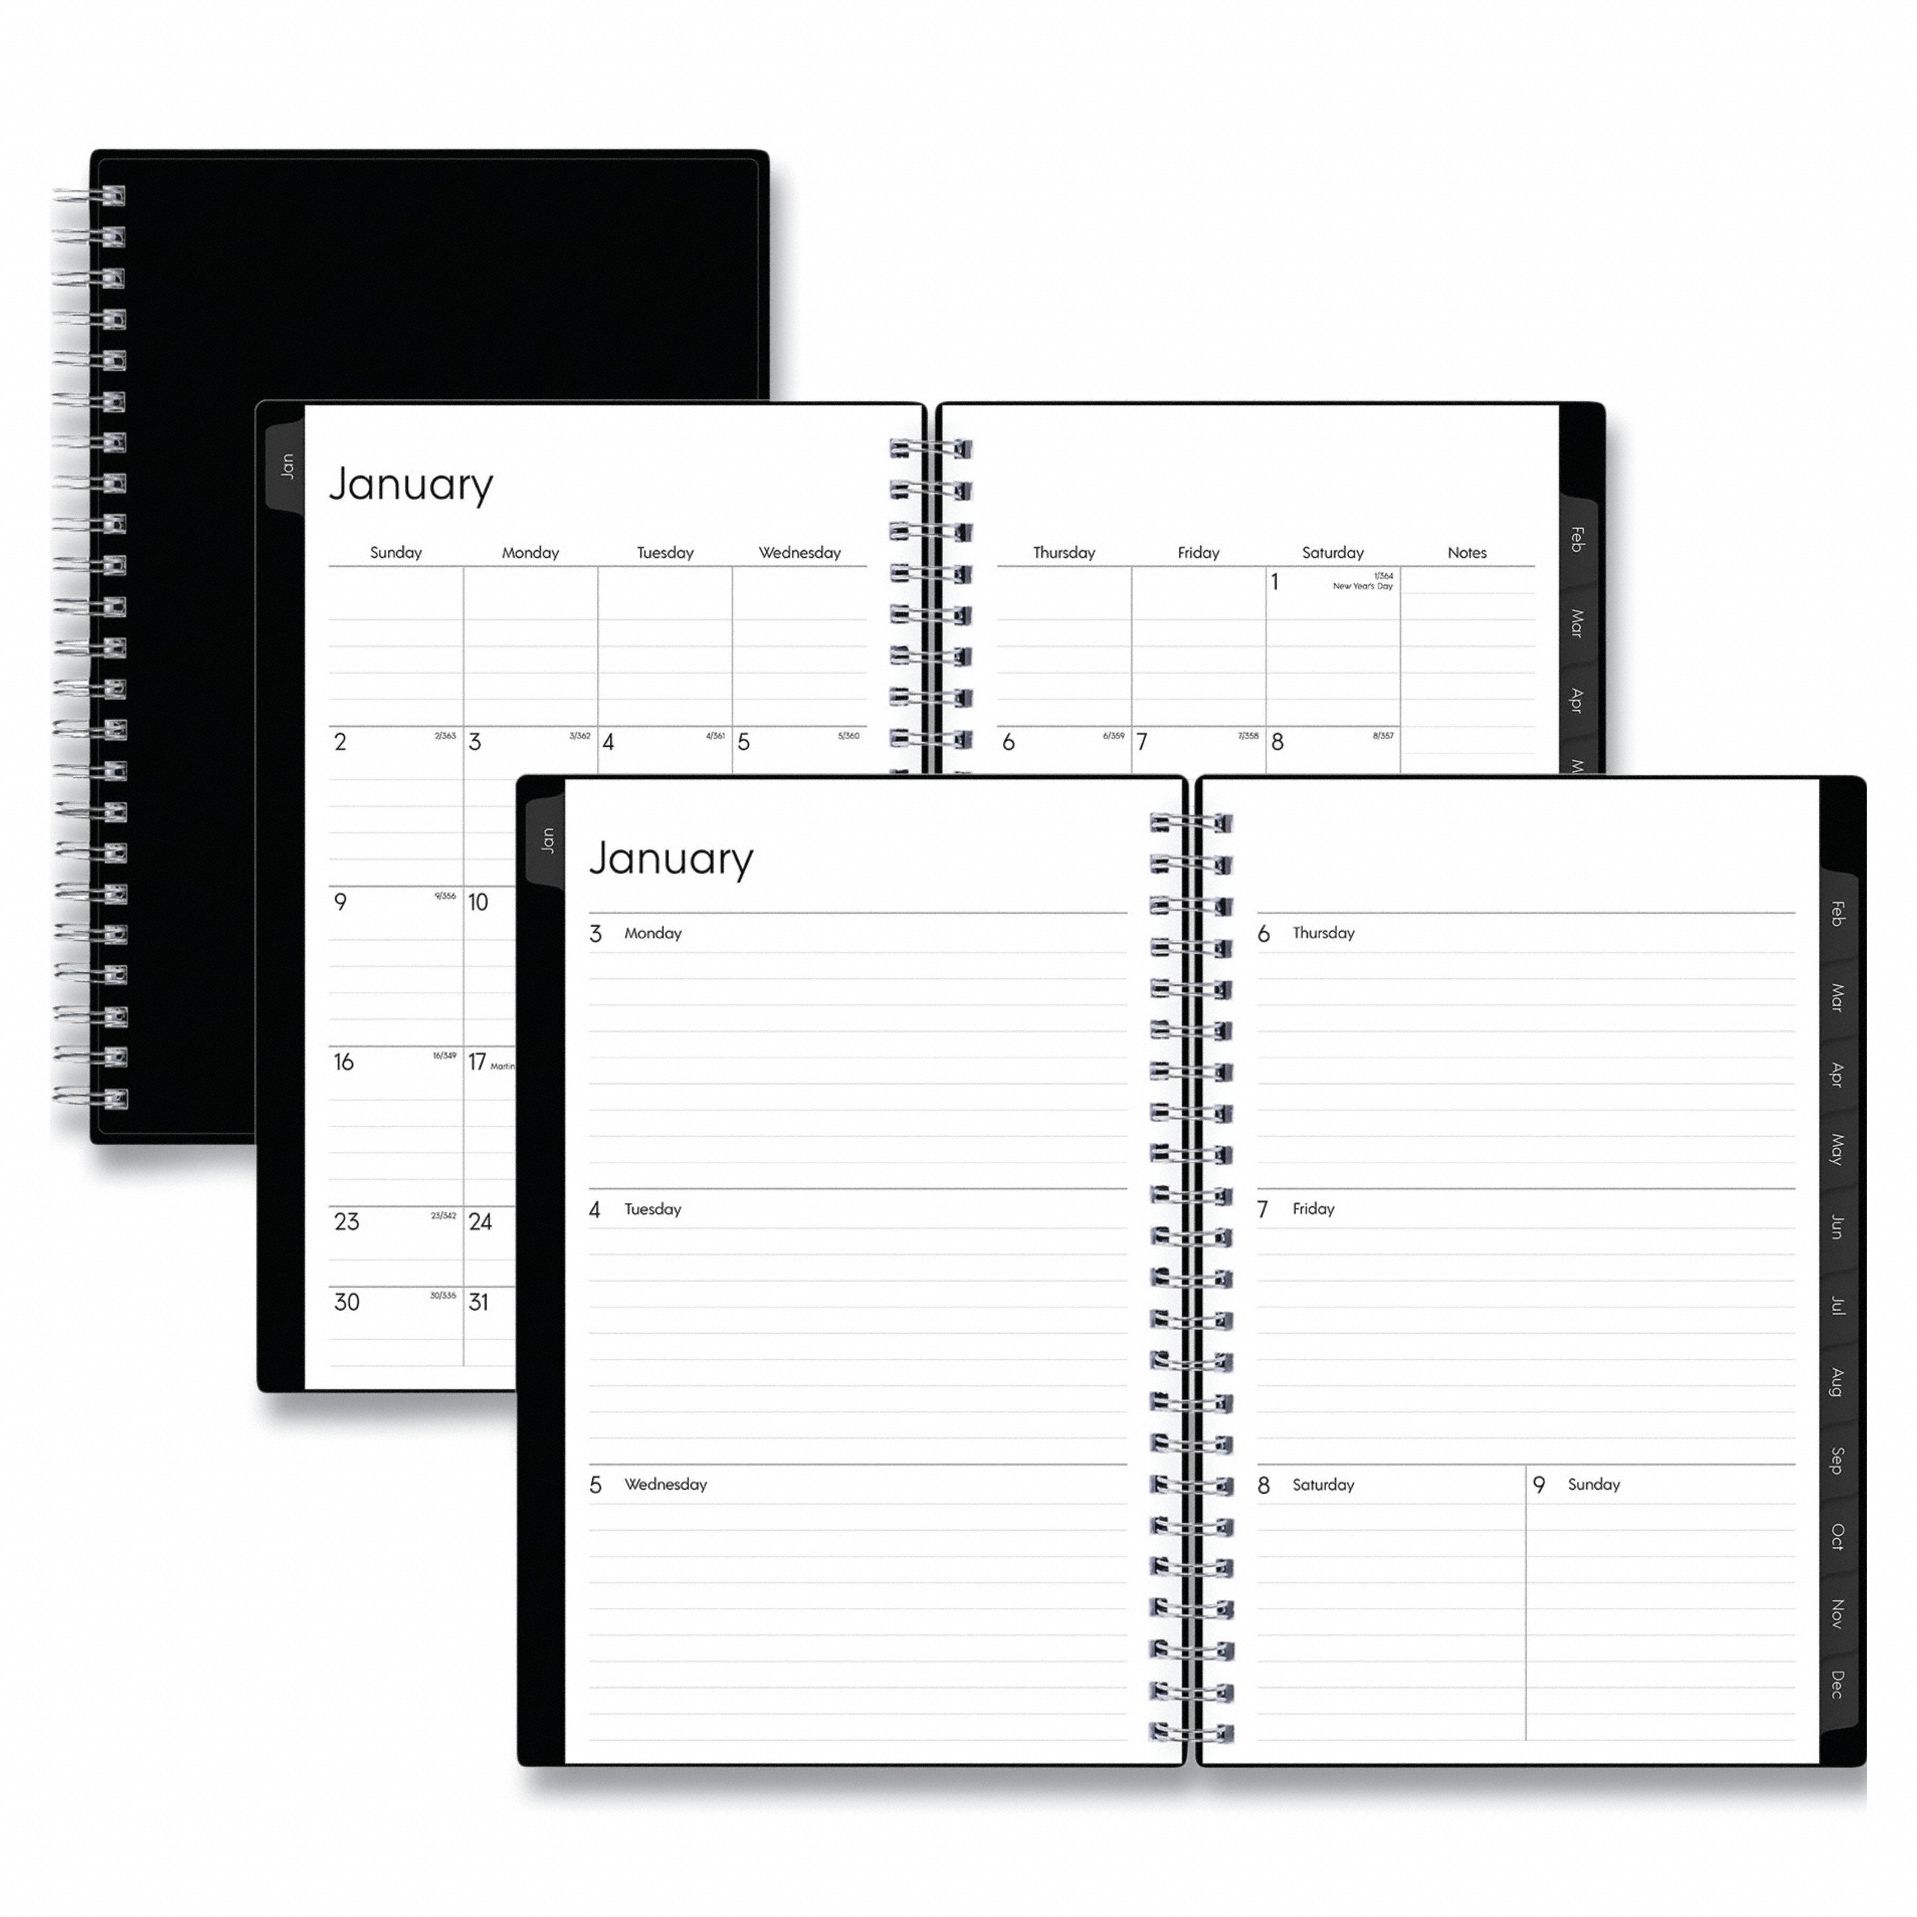 Planner: 5 x 8 in Sheet Size, Weekly, Monthly